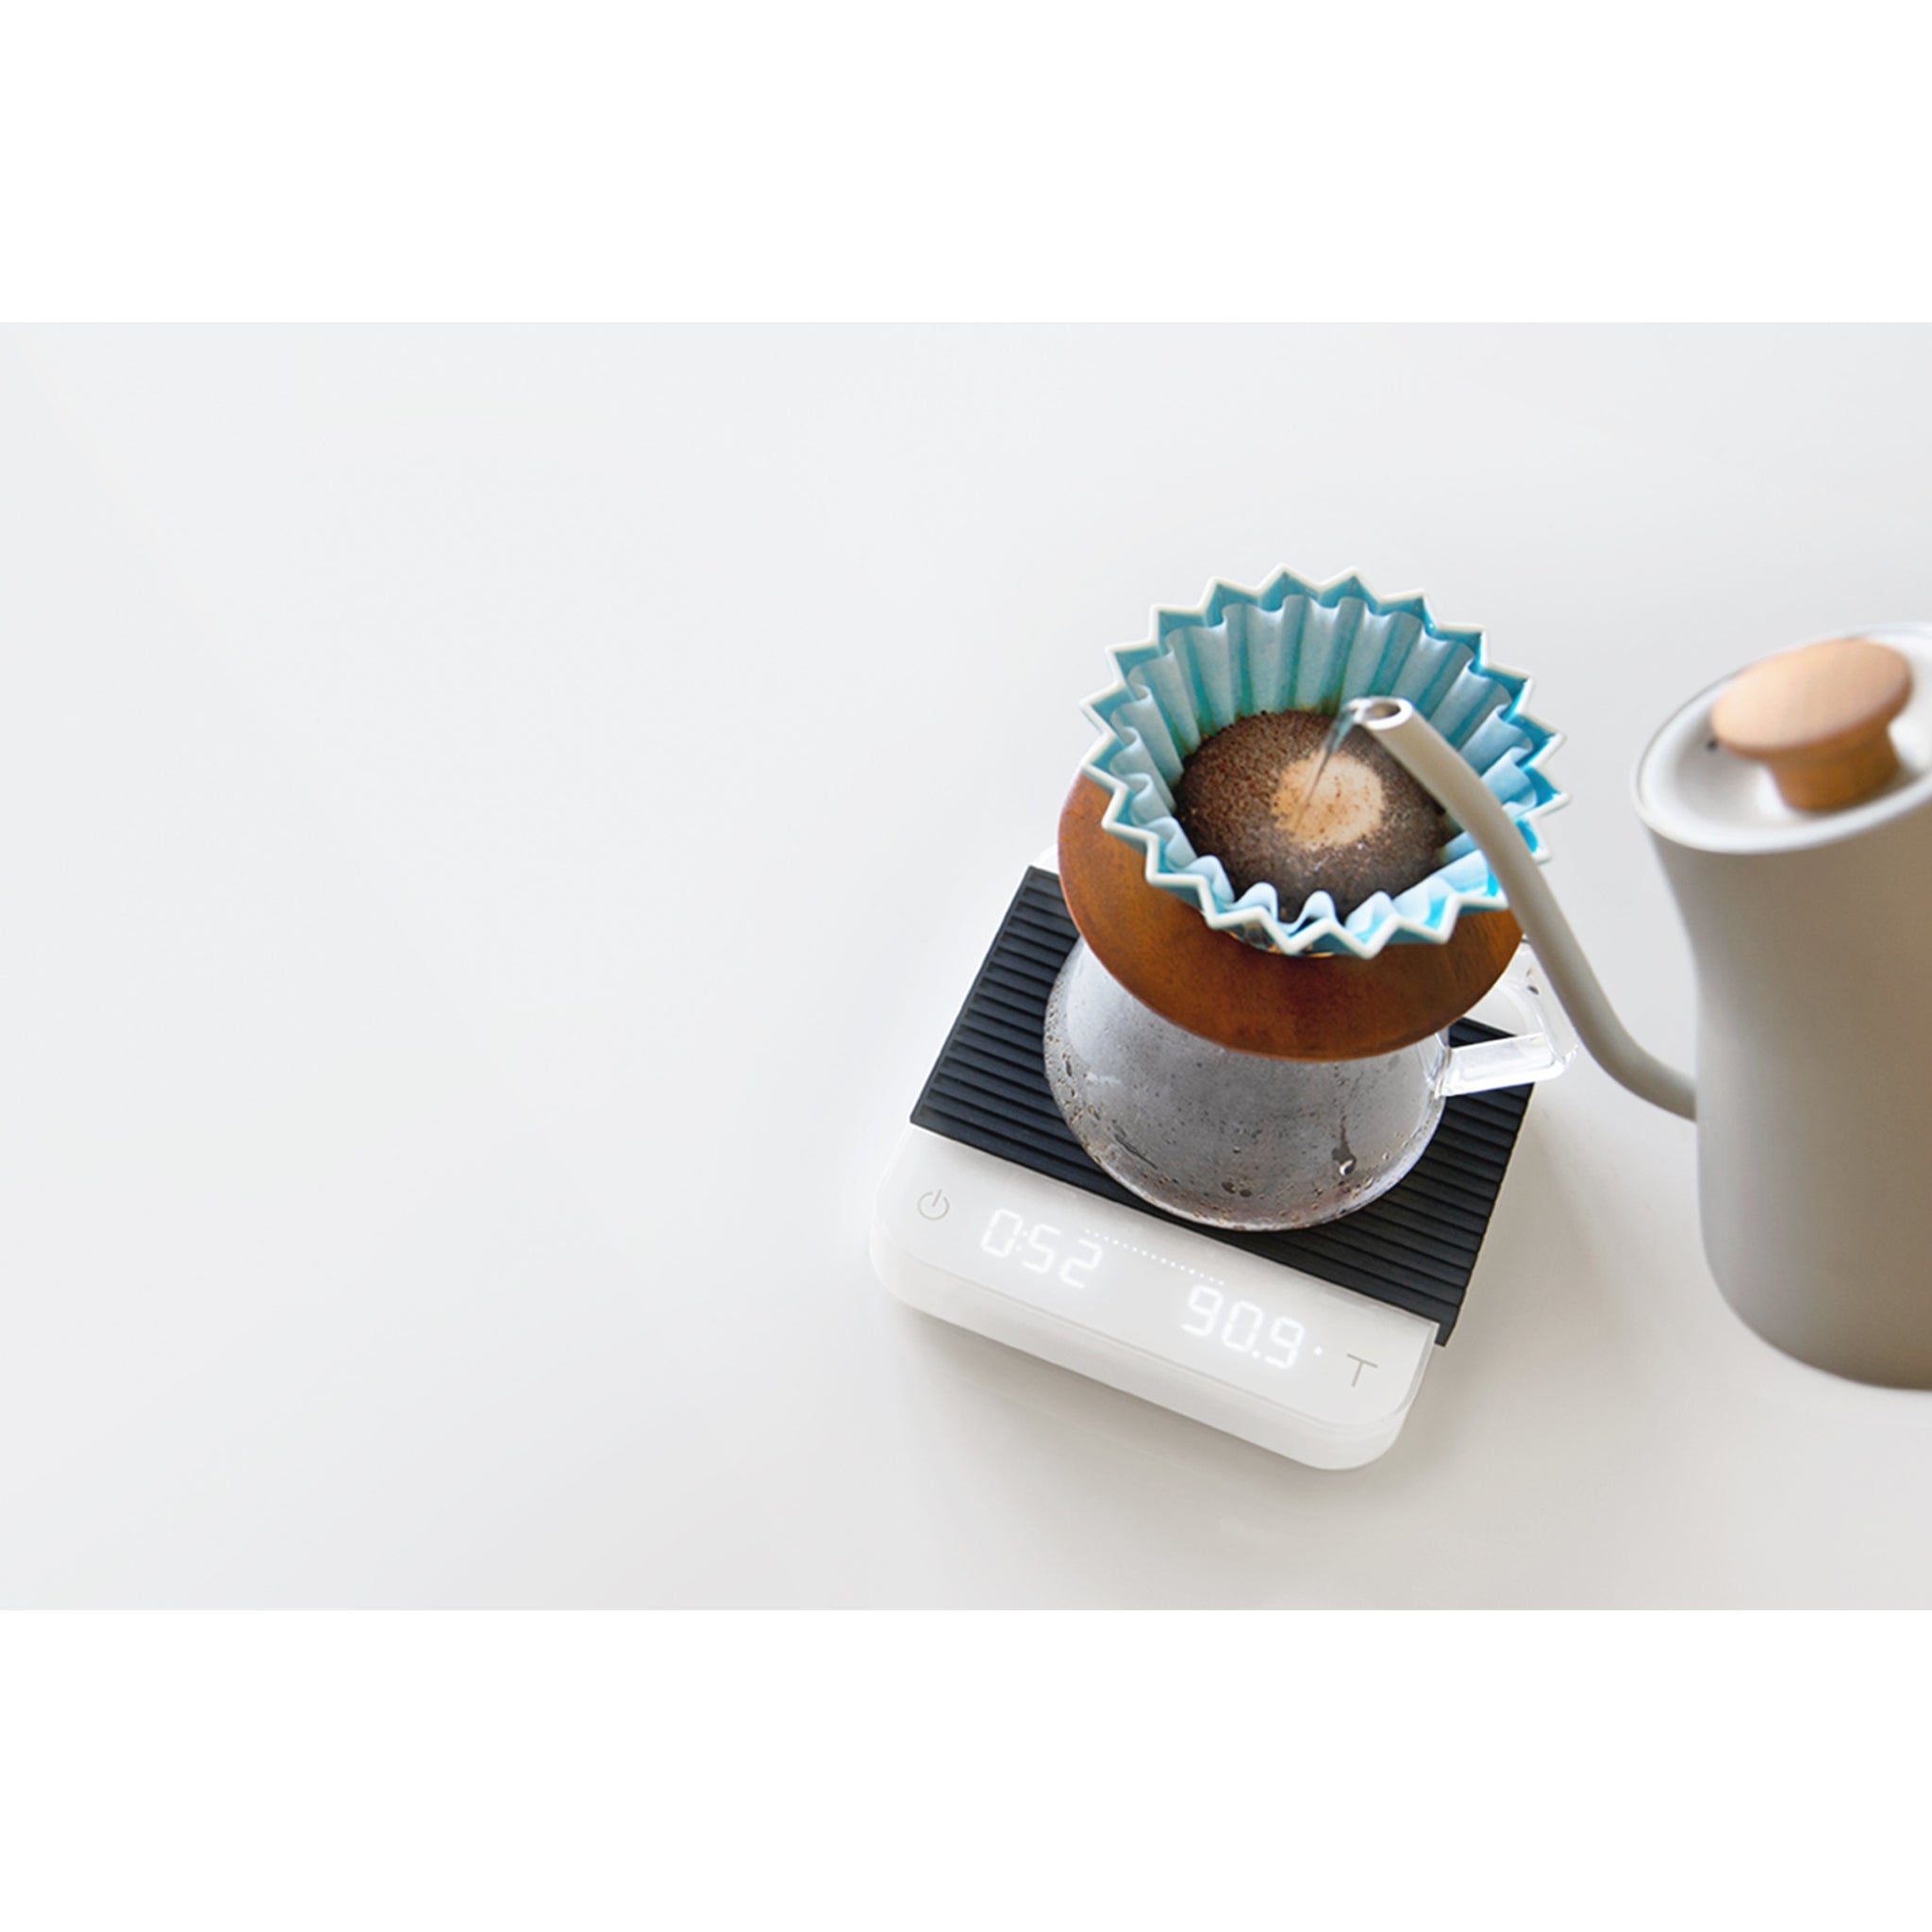 Acaia Introduces Upgrades to Pearl and Lunar ScalesDaily Coffee